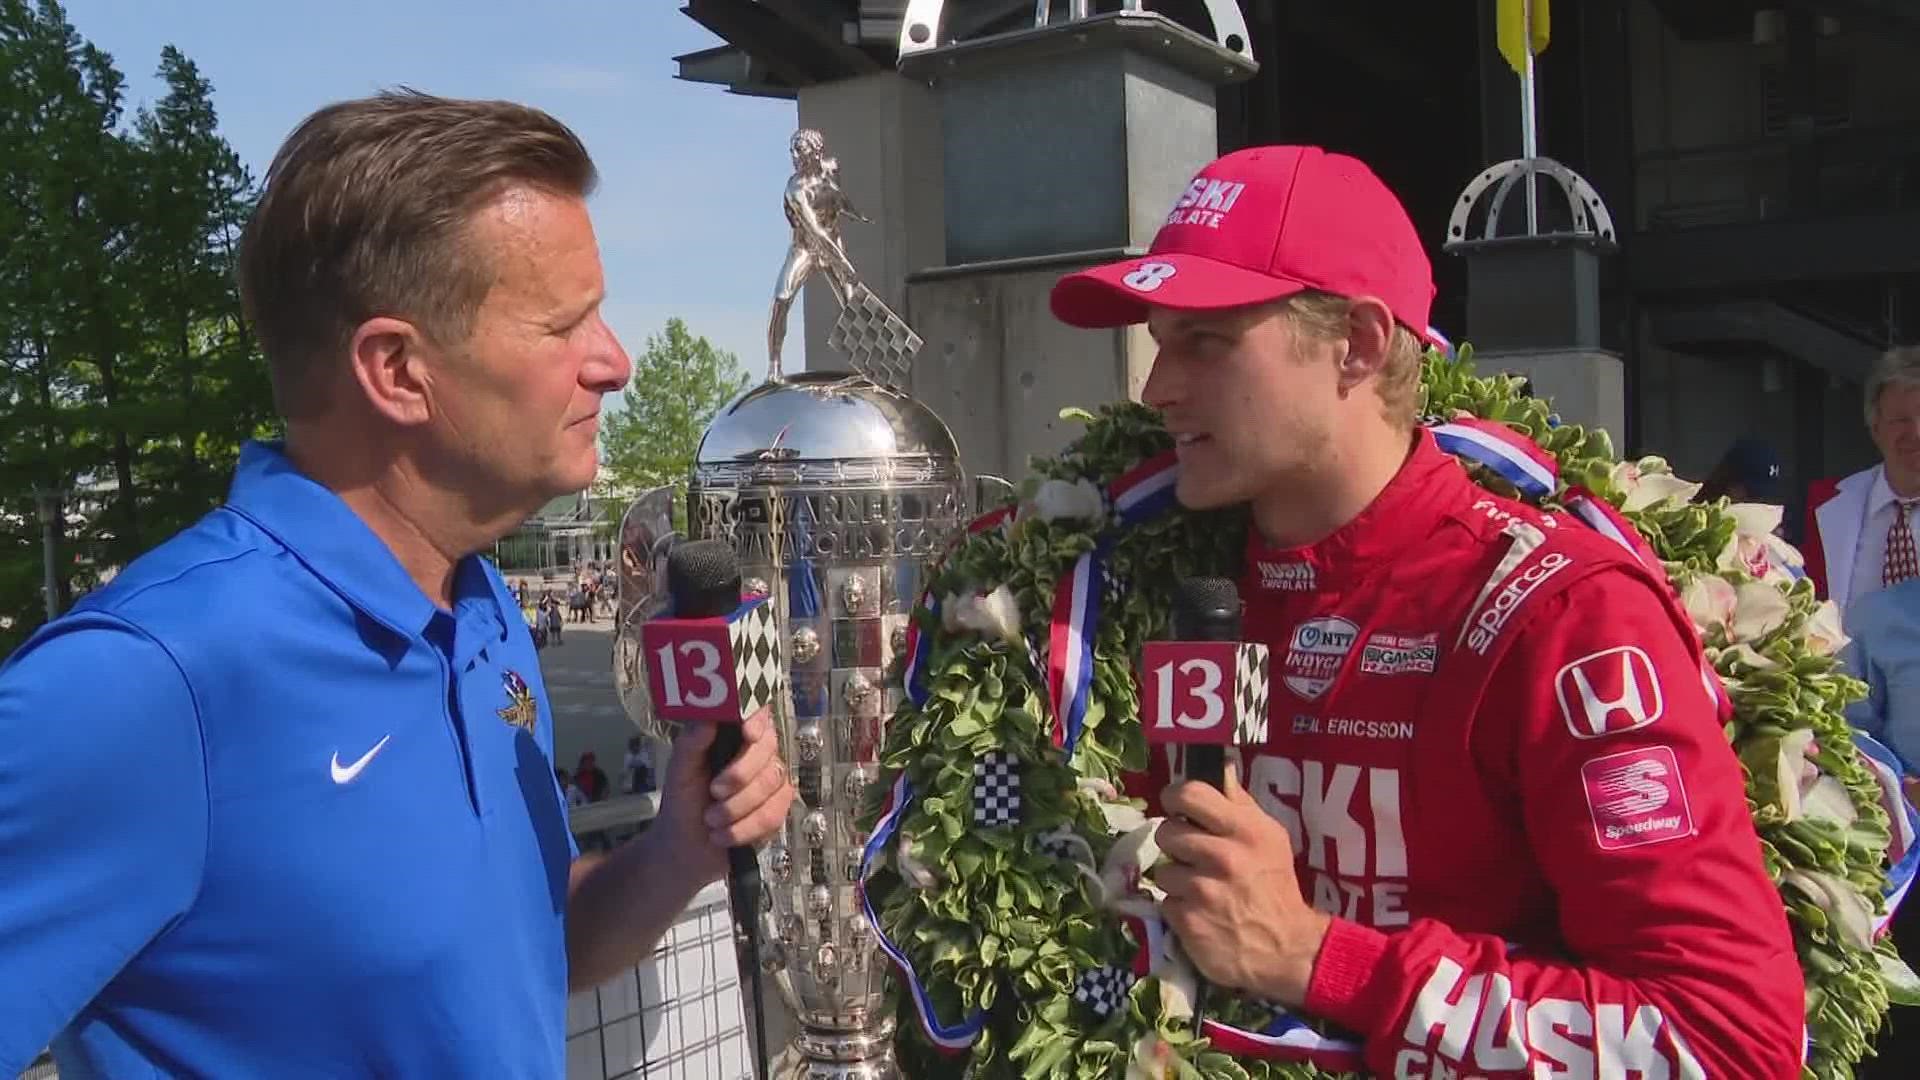 It is the fifth Indy 500 victory for team owner Chip Ganassi.